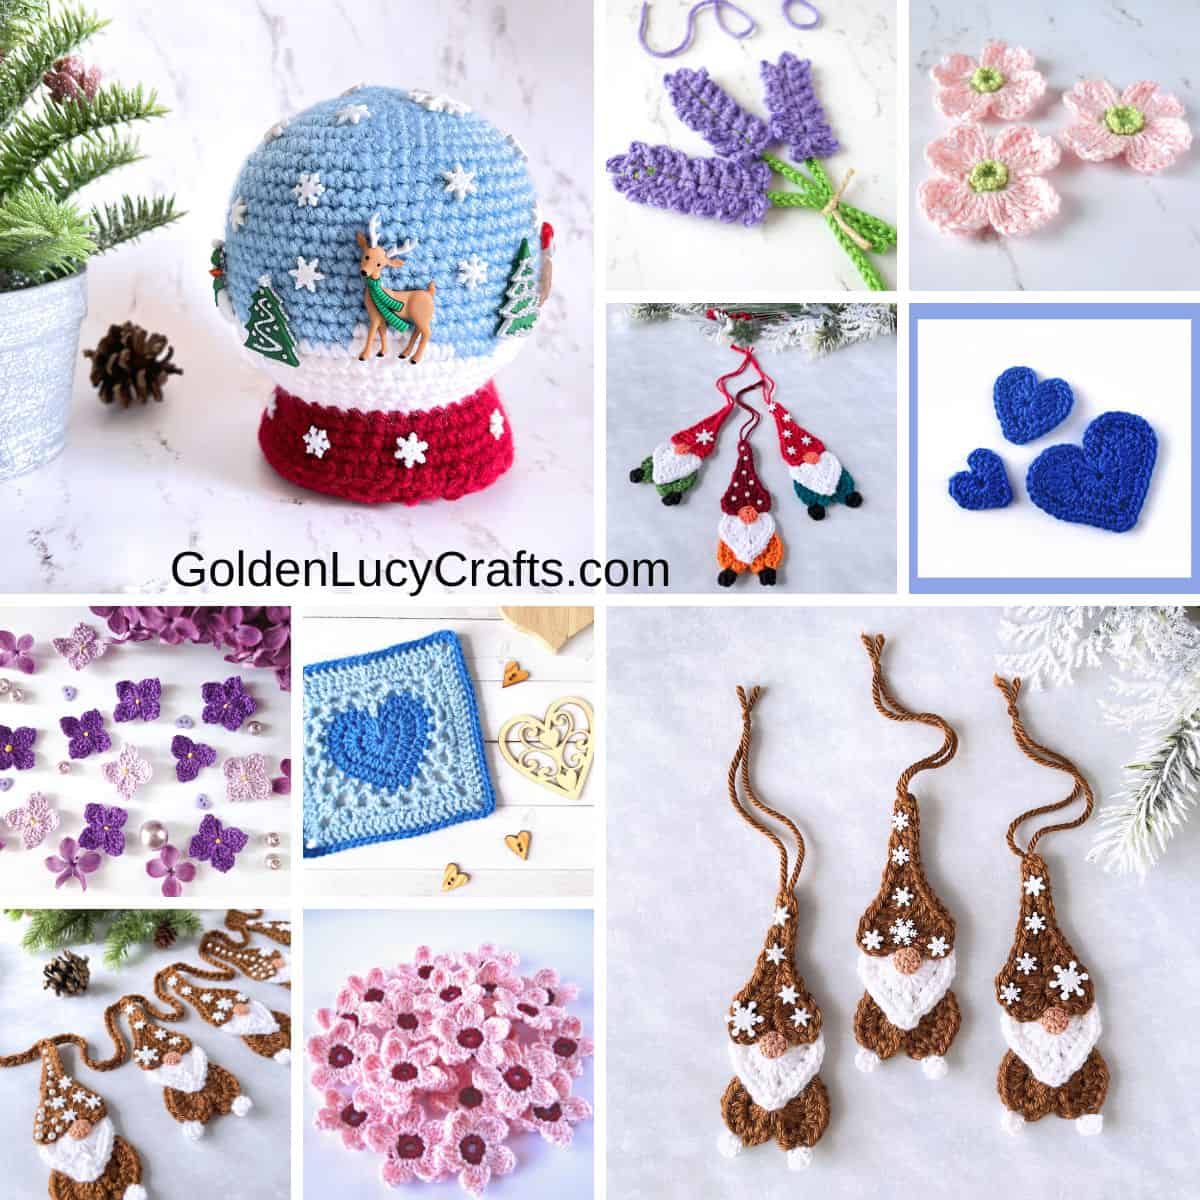 Photo collage of various crocheted items.